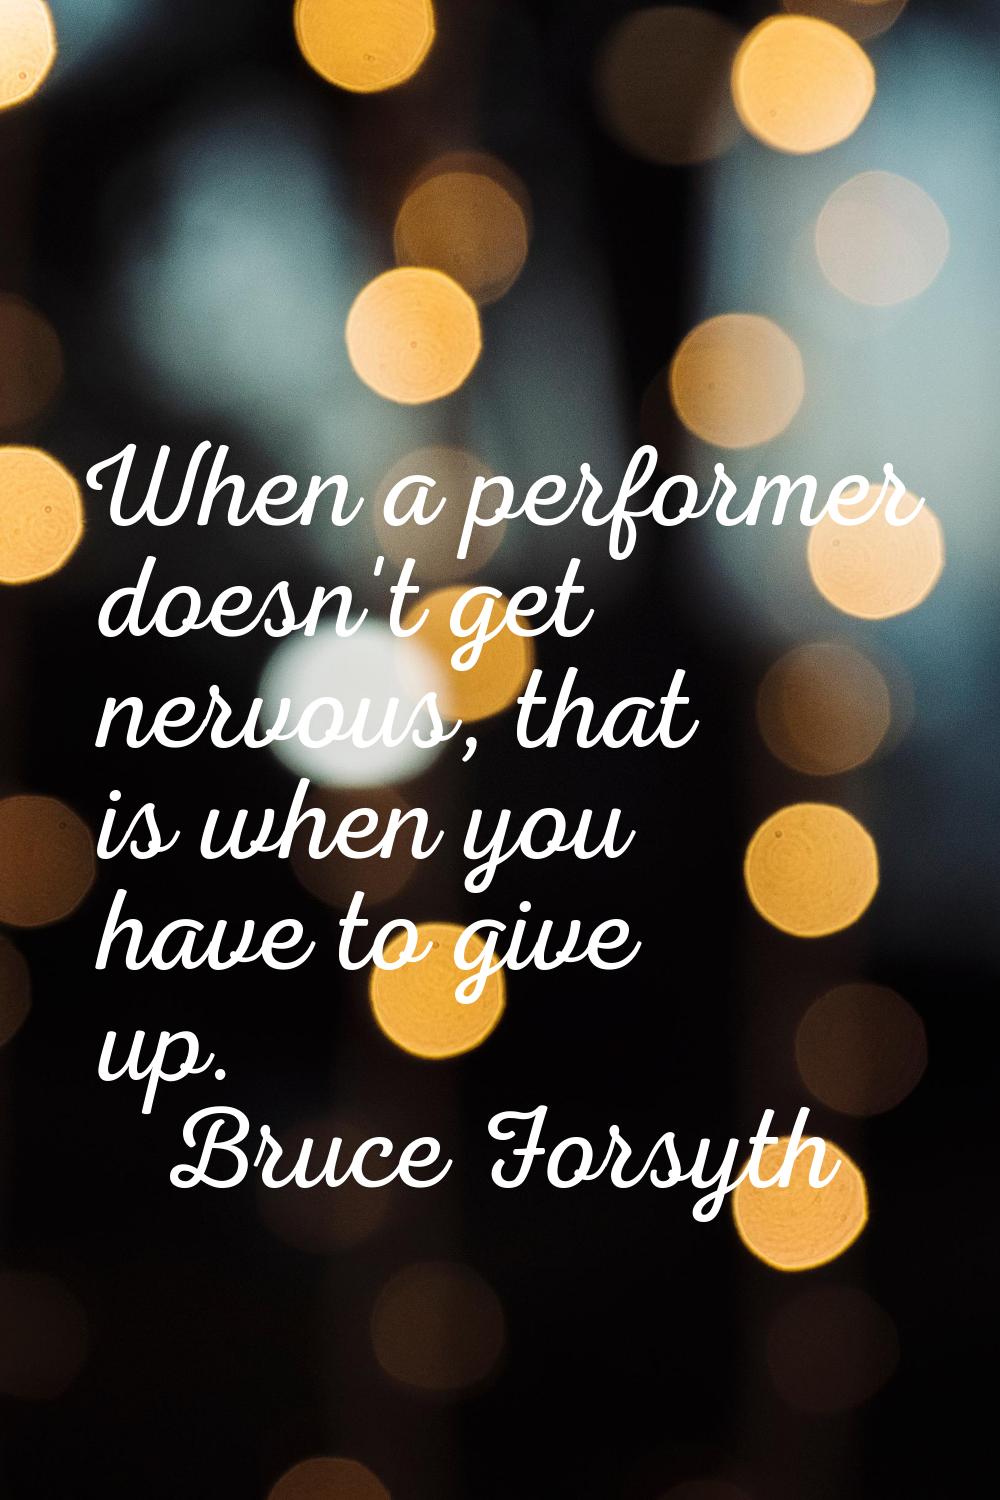 When a performer doesn't get nervous, that is when you have to give up.